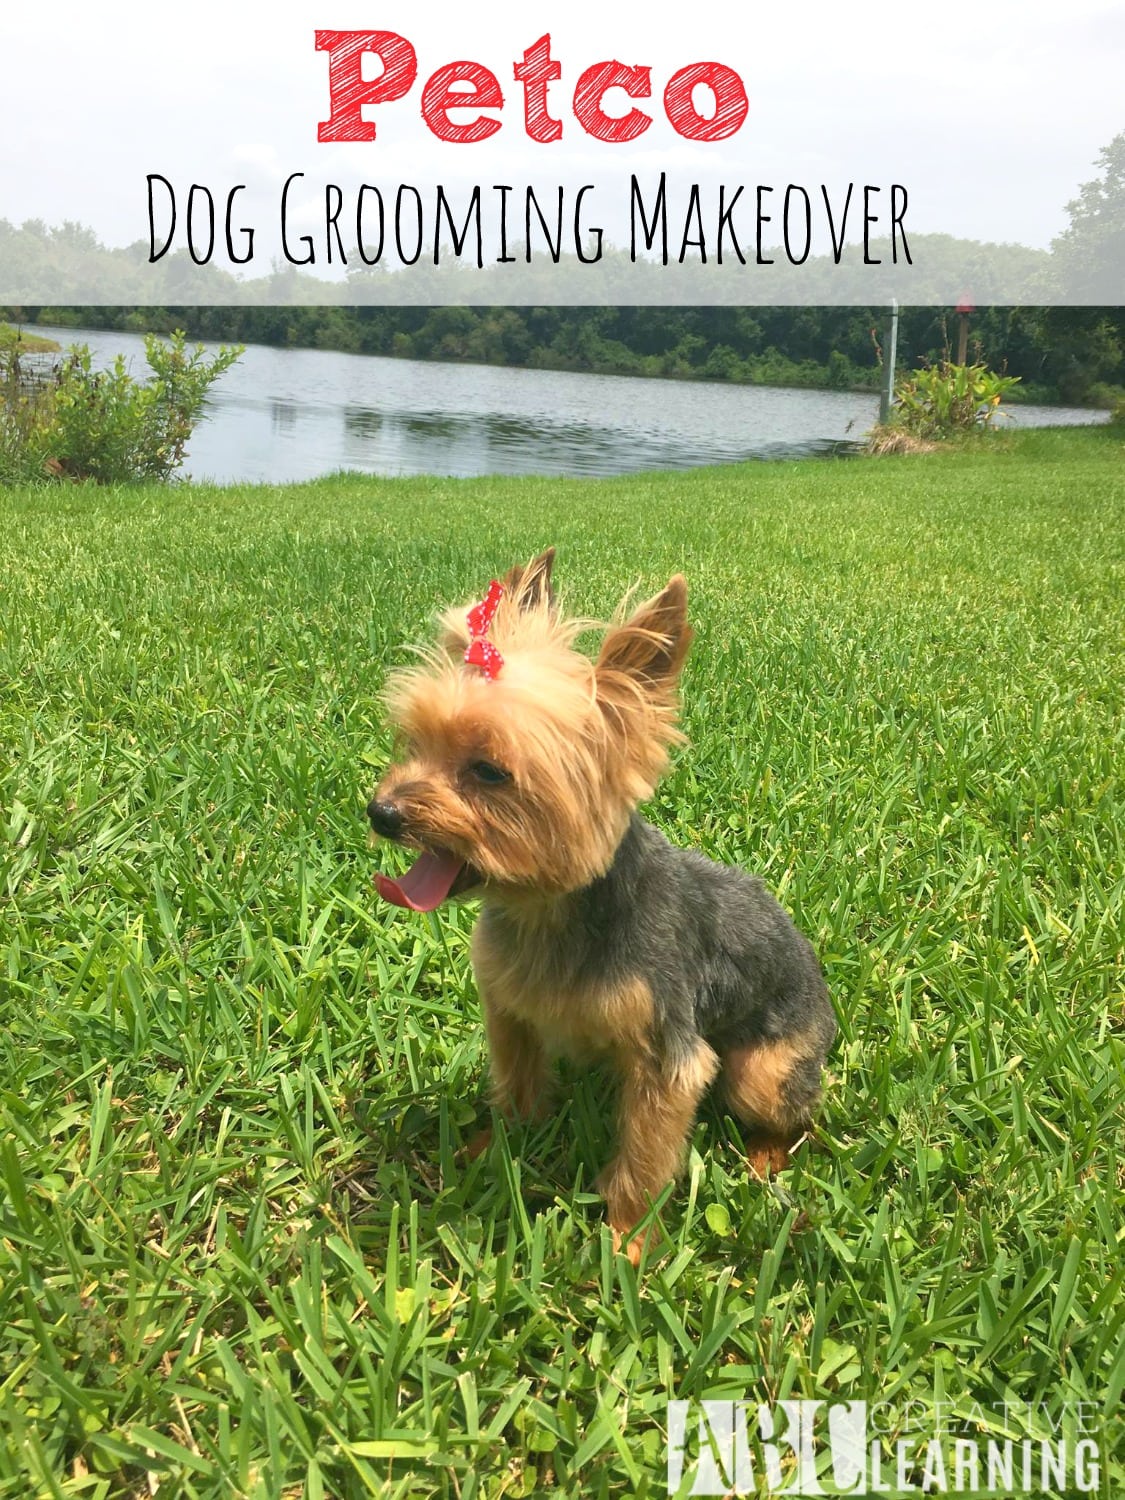 Petco Dog Grooming Makeover